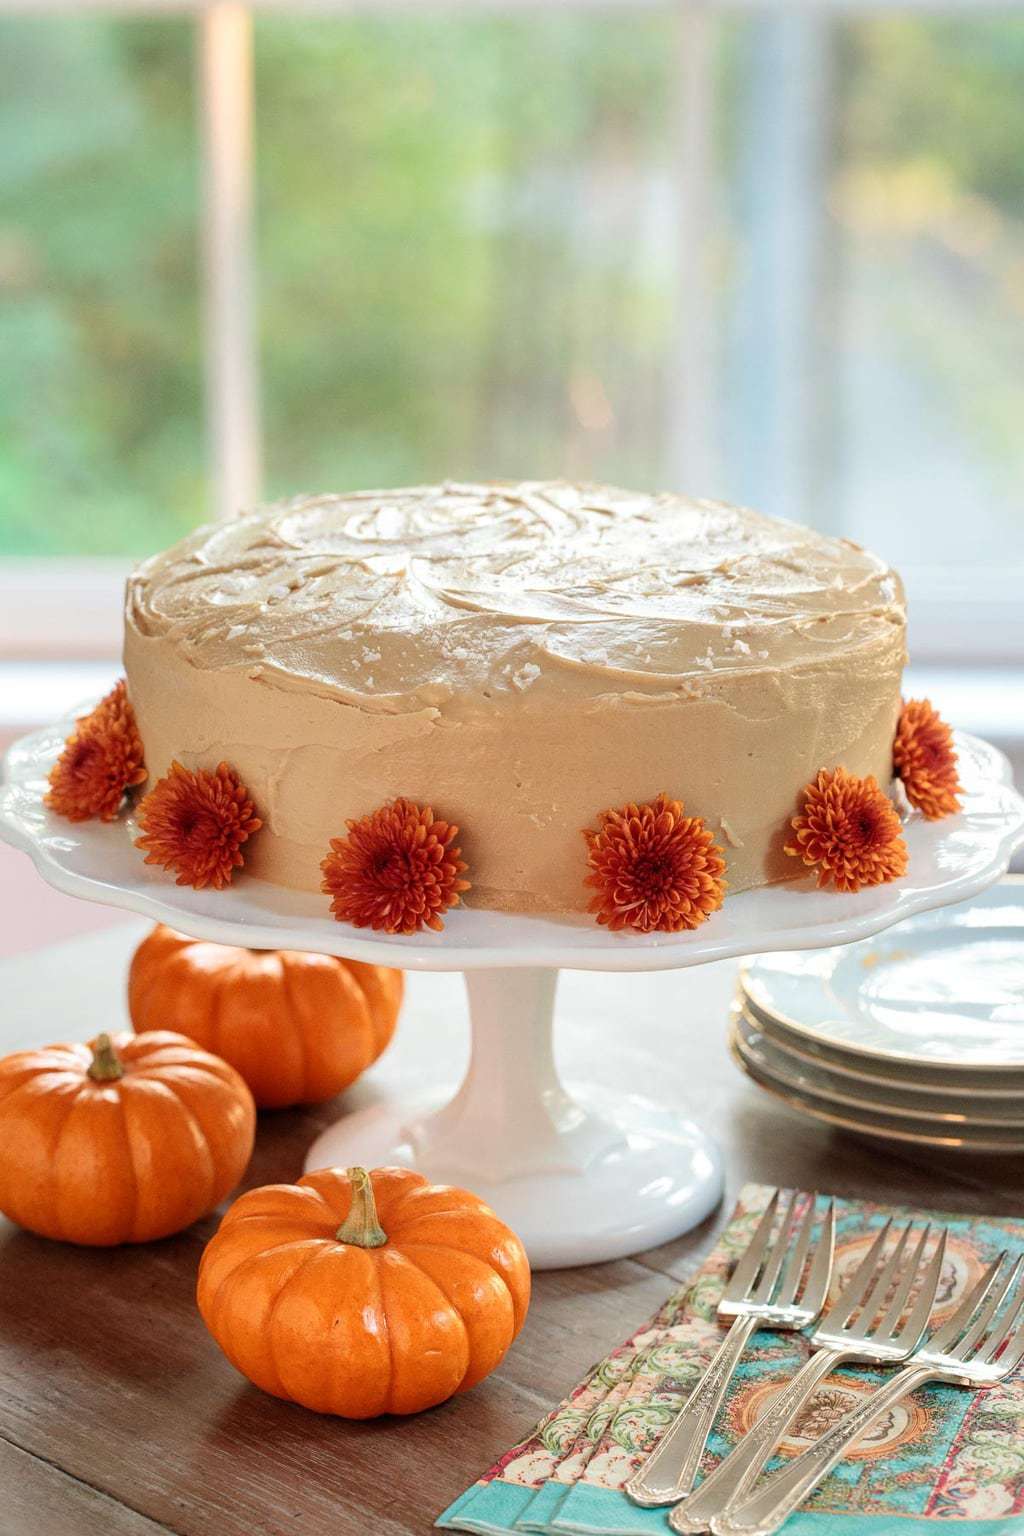 Vertical photo of a One-Bowl Pumpkin Cake on a white pedestal cake stand, decorated with orange mums and miniature pumpkins.